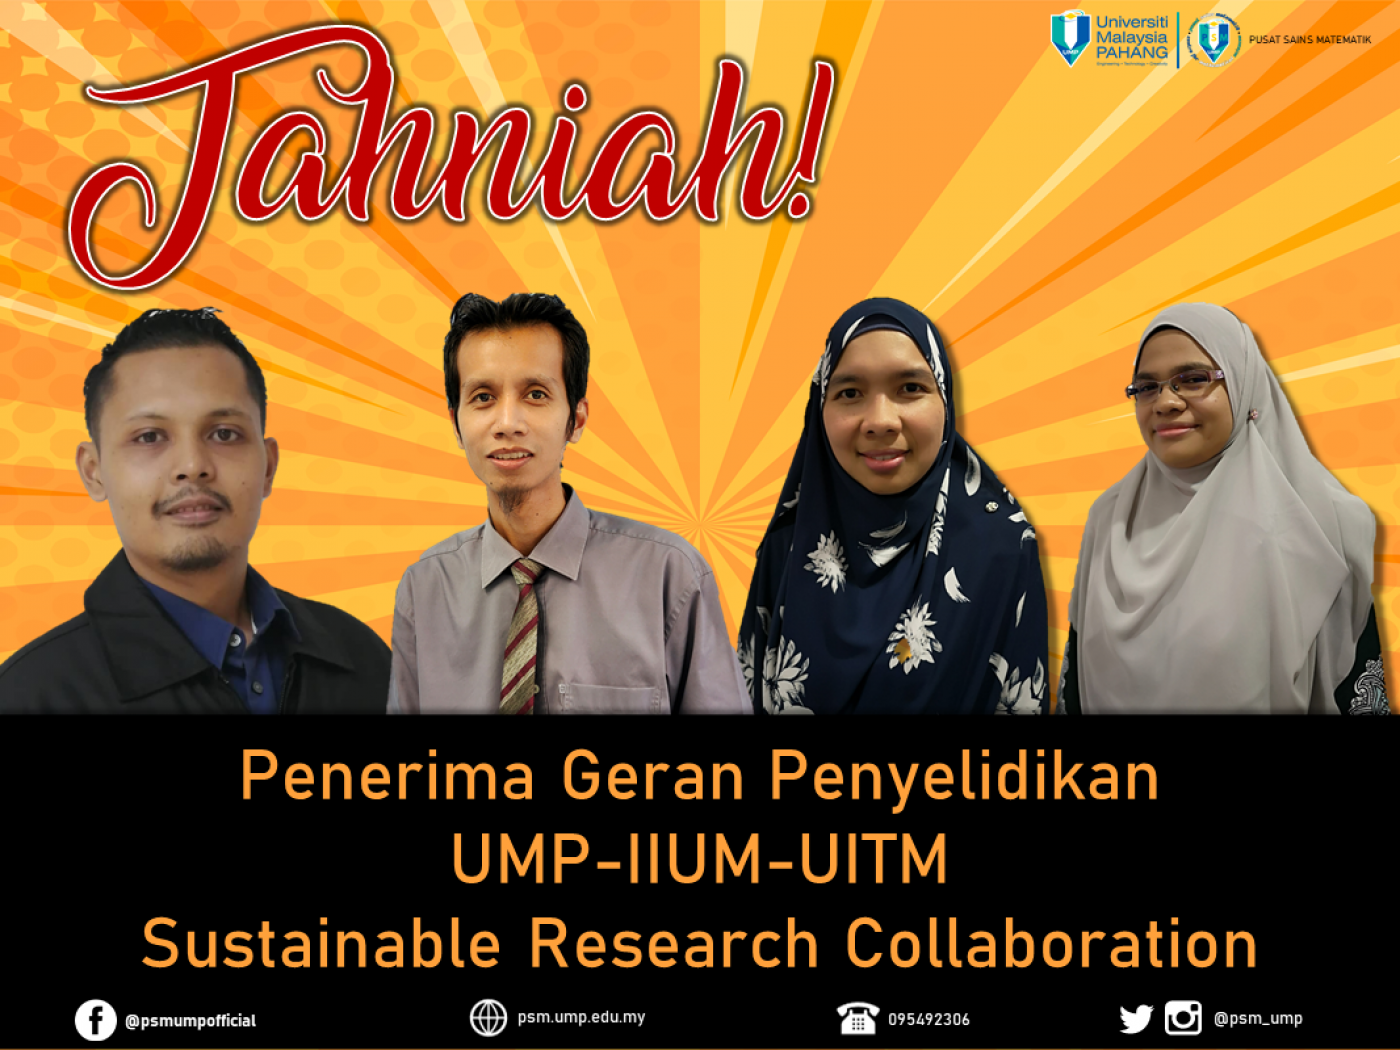 PSM researchers securing UMP-IIUM-UITM Sustainable Research Collaboration 2020